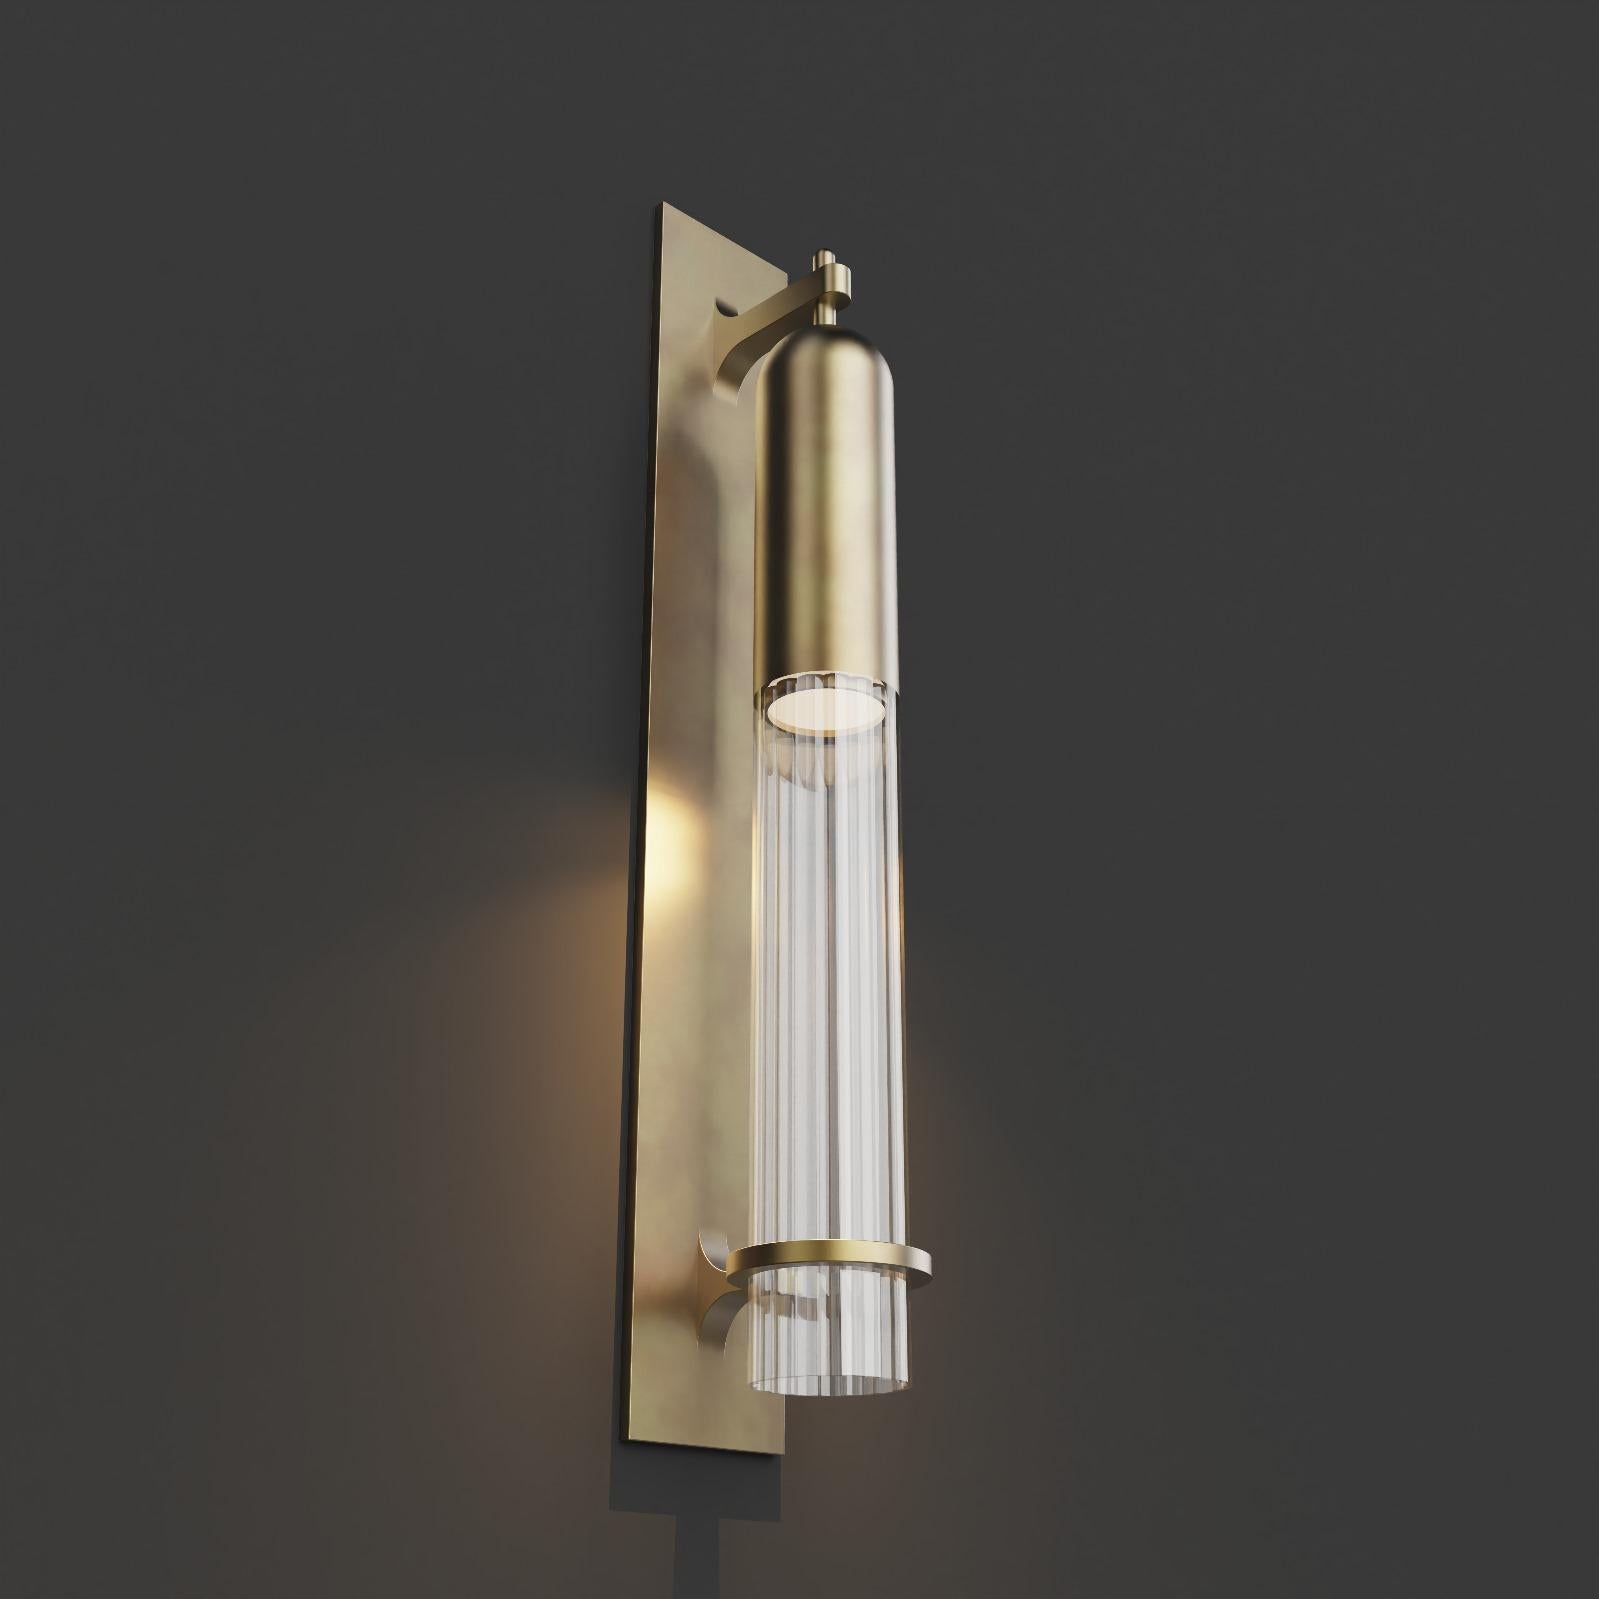 European Imagin Rigata Wall Sconce in Brushed Brass and Fluted Glass For Sale